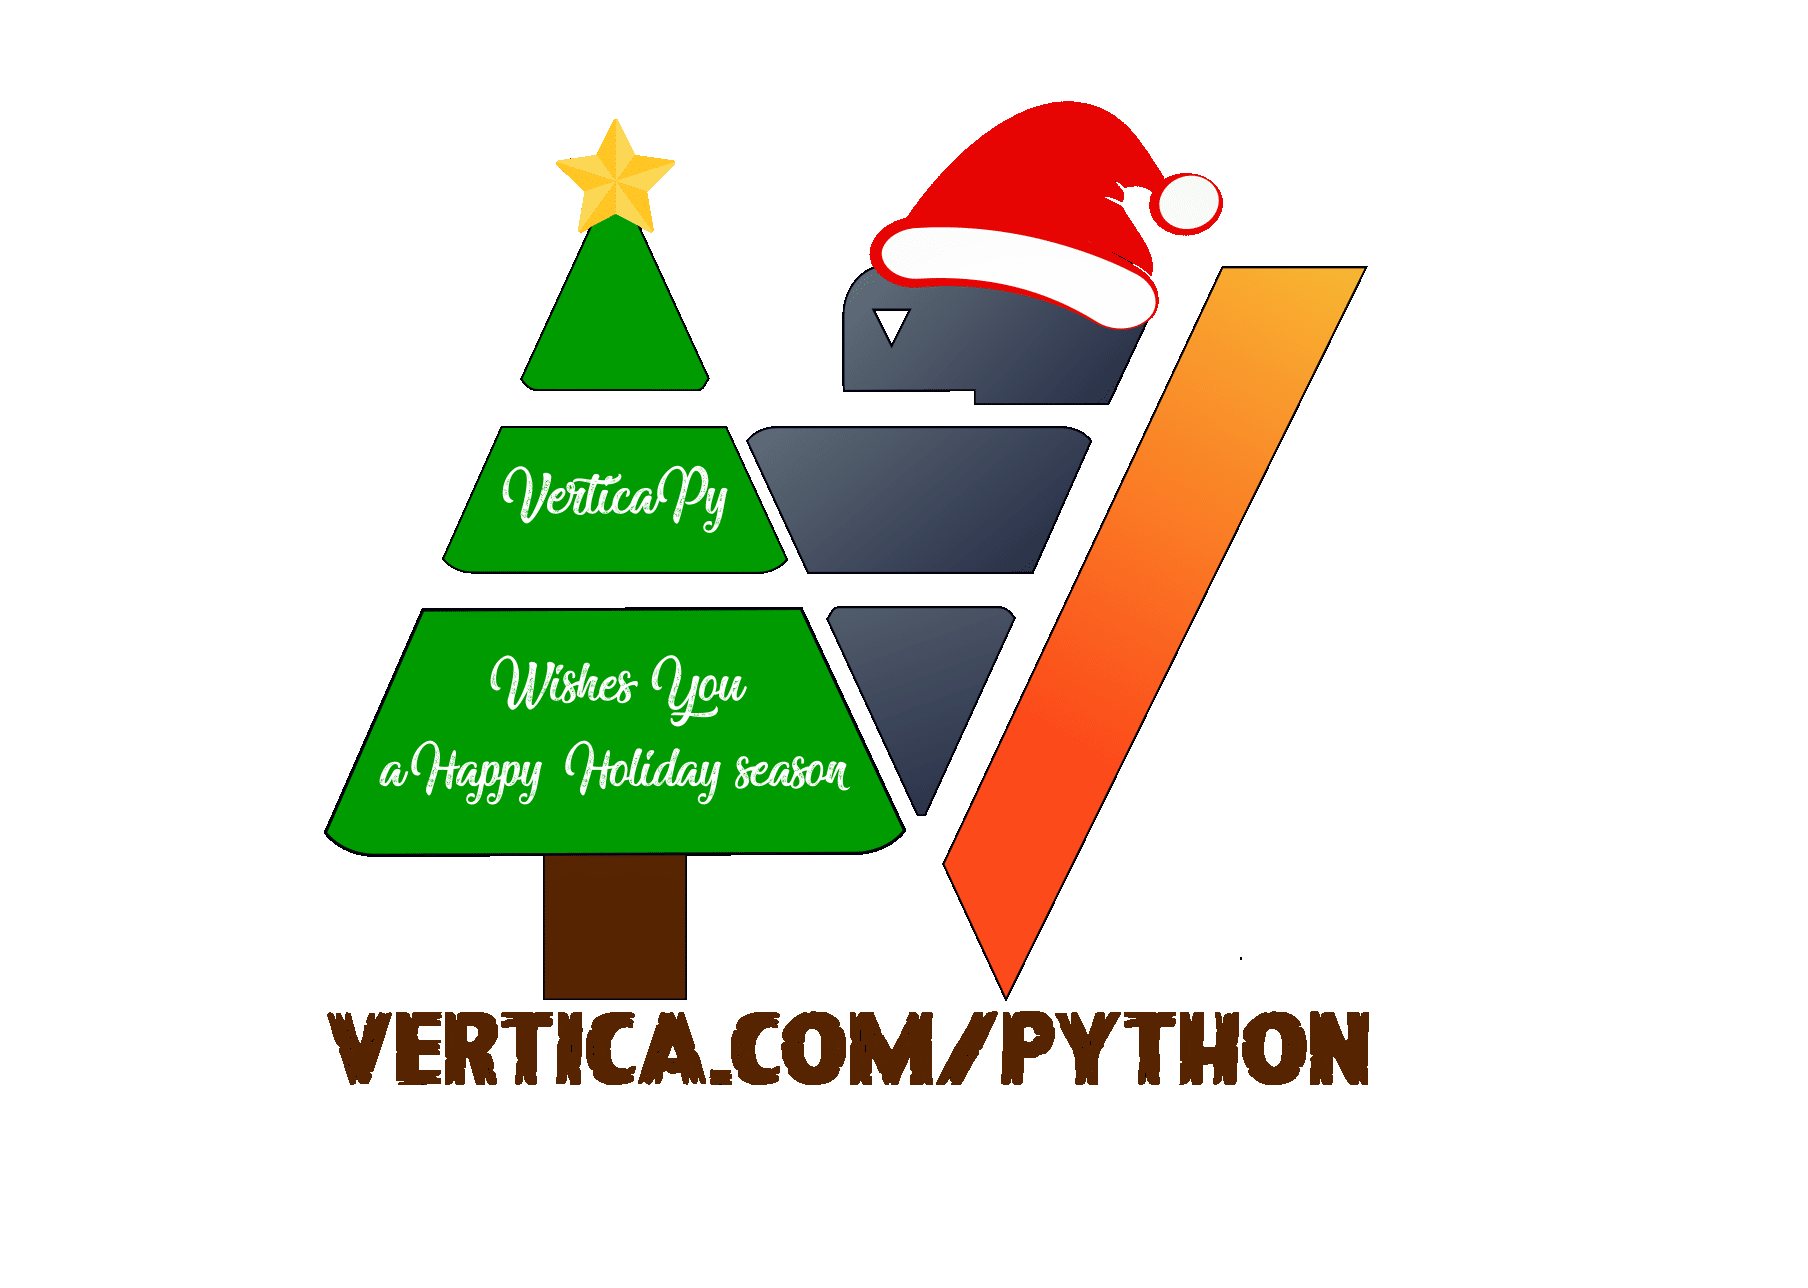 Vertica wishes you a Happy Holidays